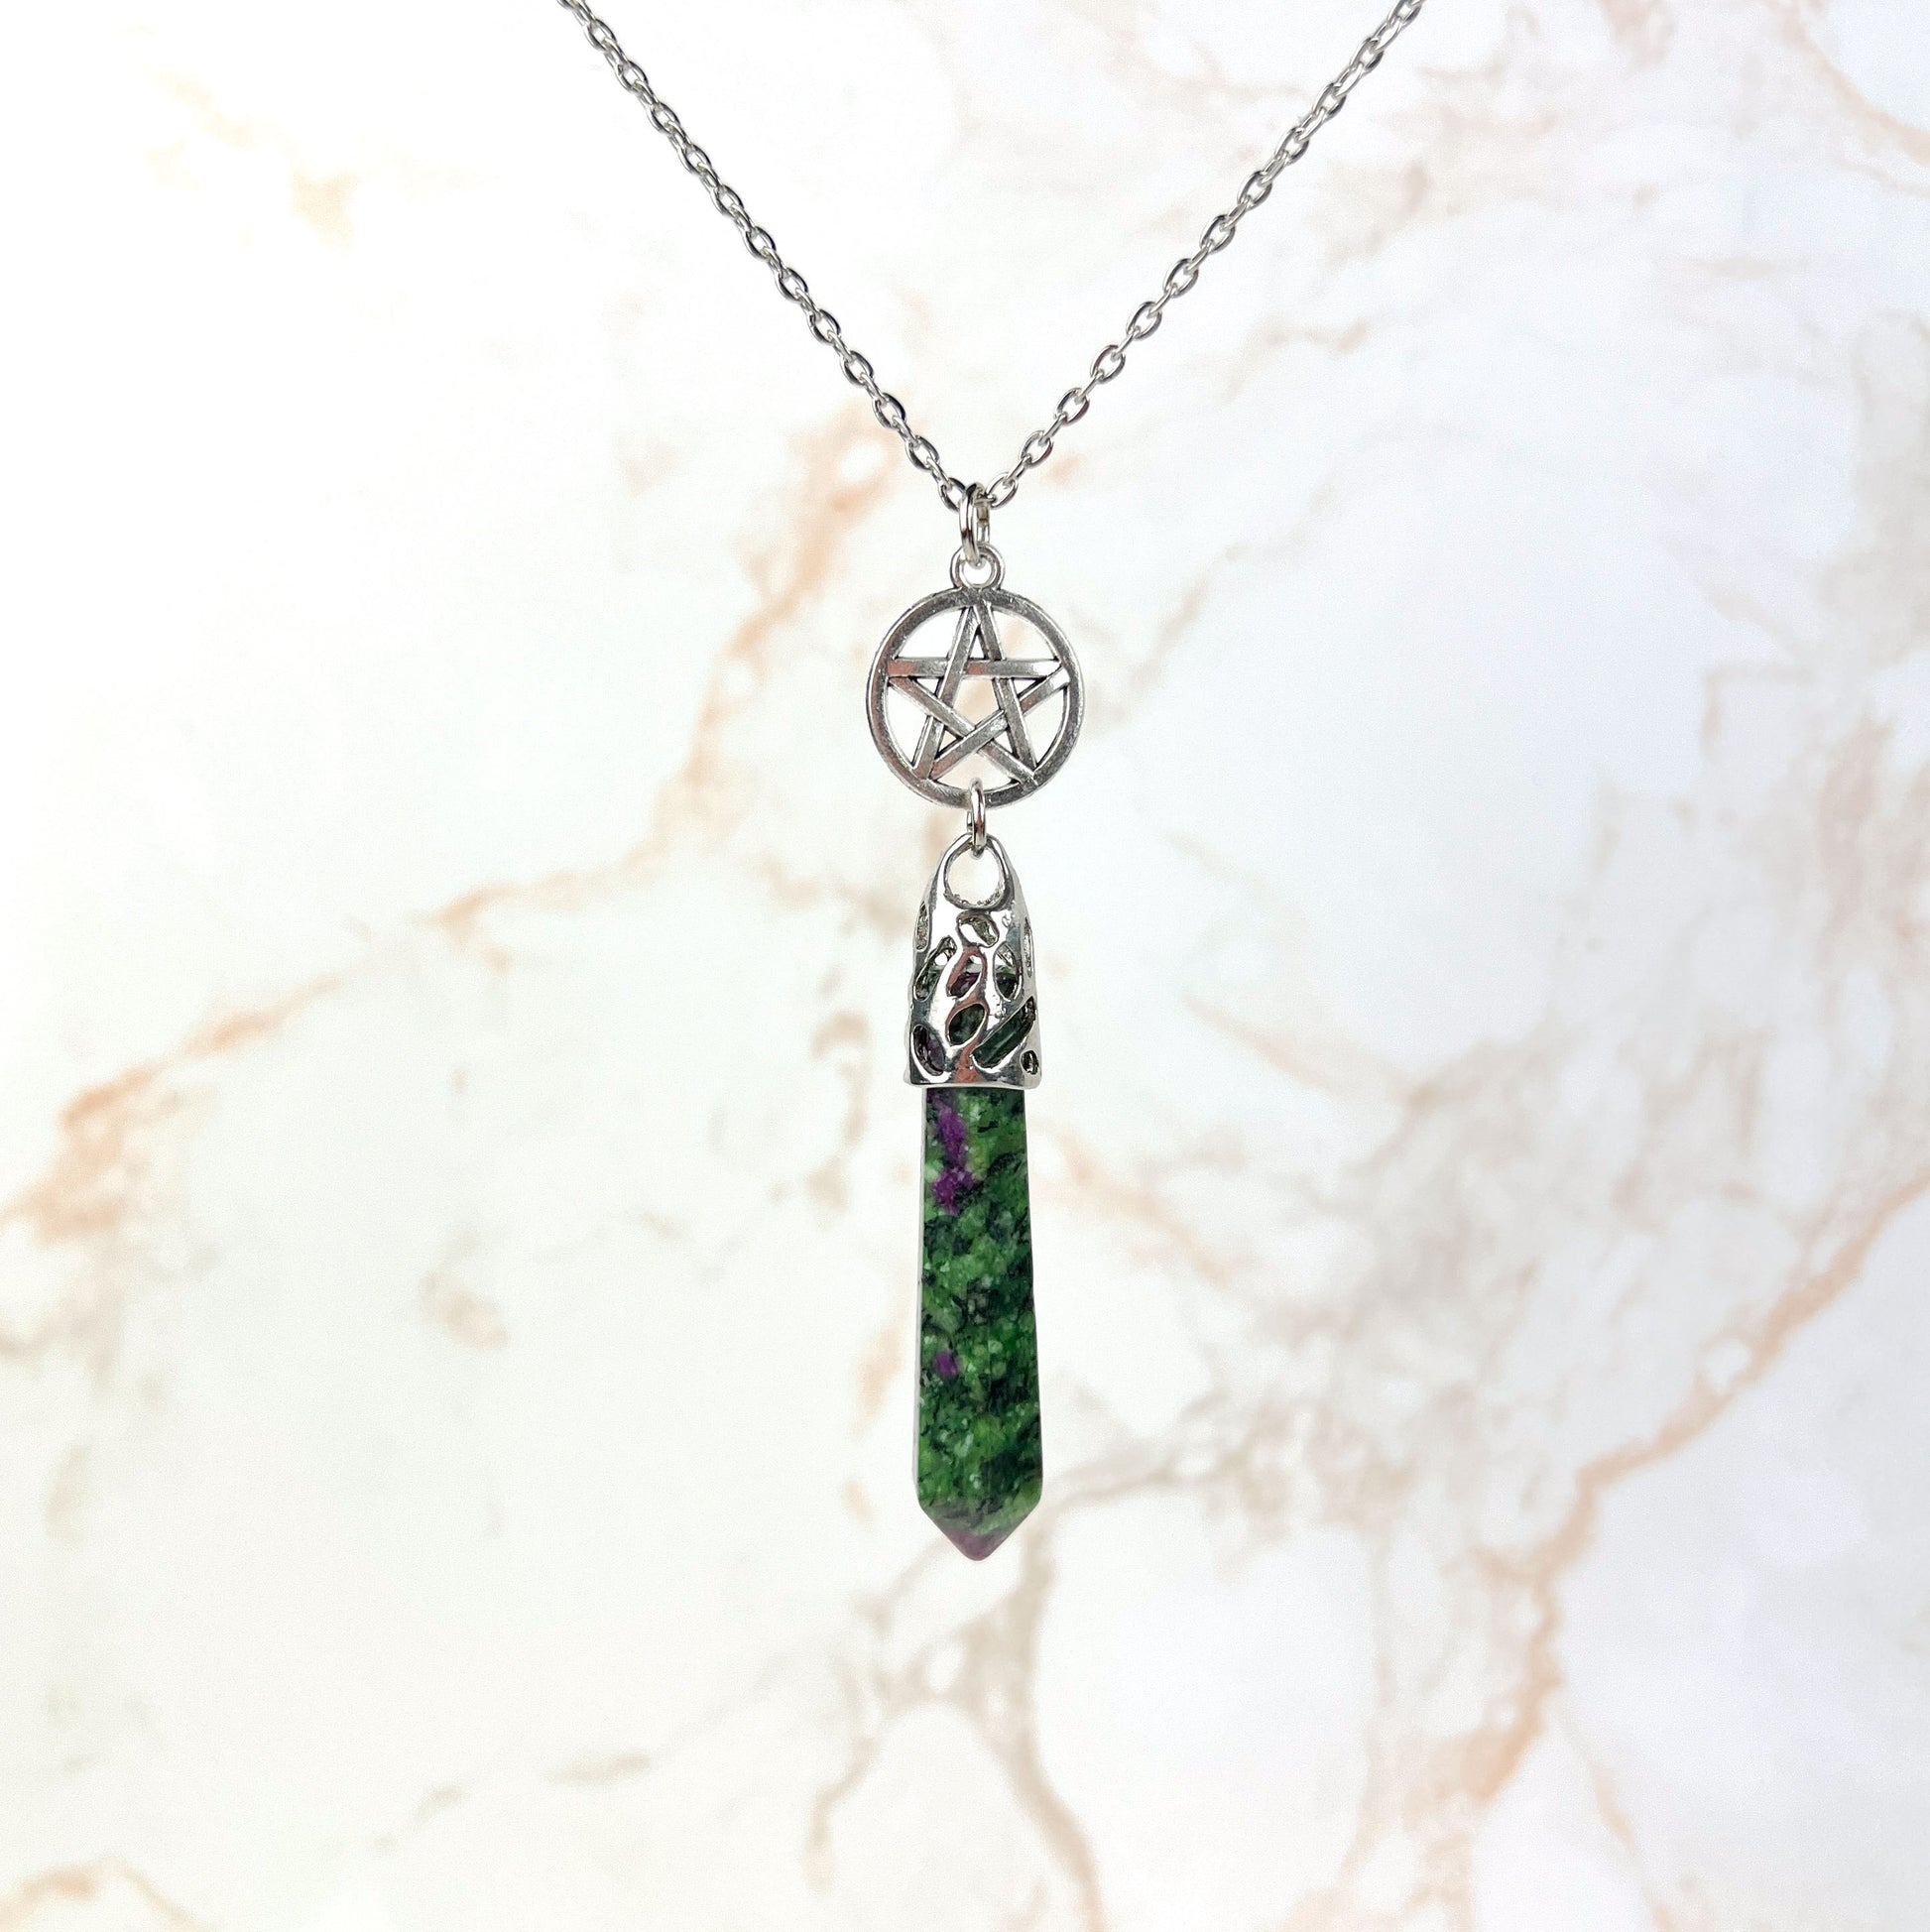 Ruby in Zoisite Anyolite crystal and pentacle divination necklace Baguette Magick